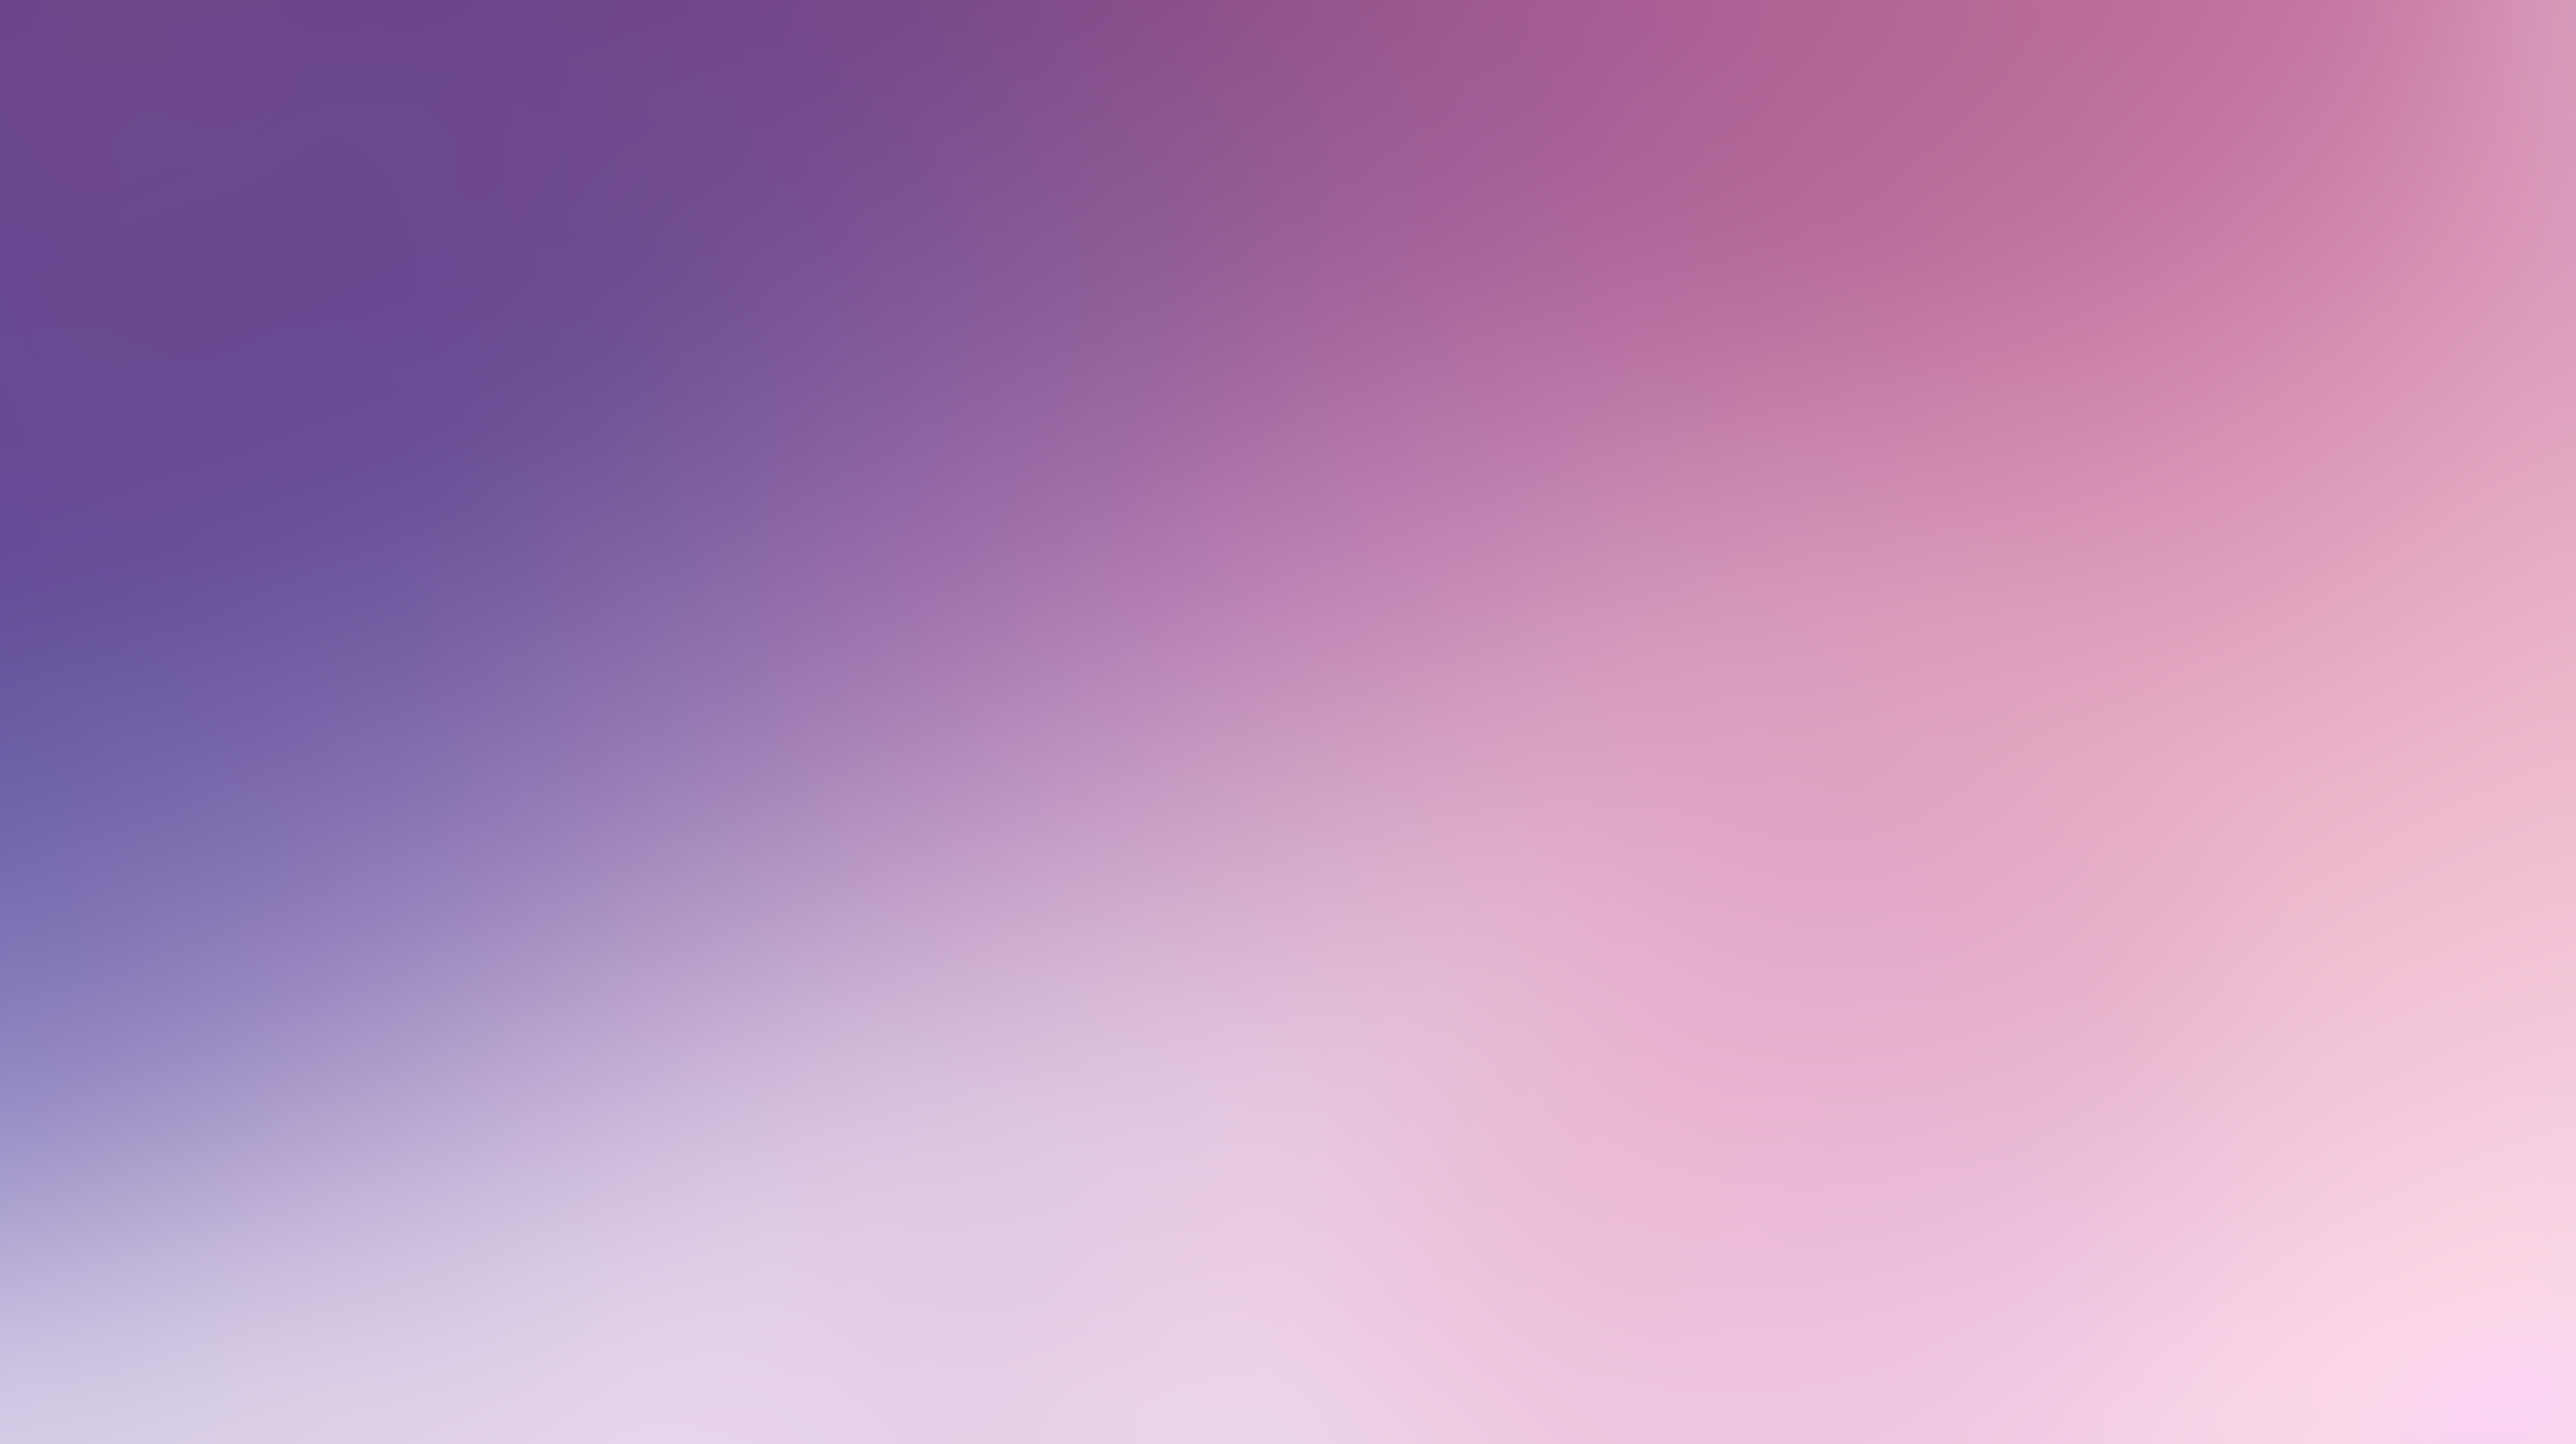 Purple,pink,voilet and peach soft background,abstract color light